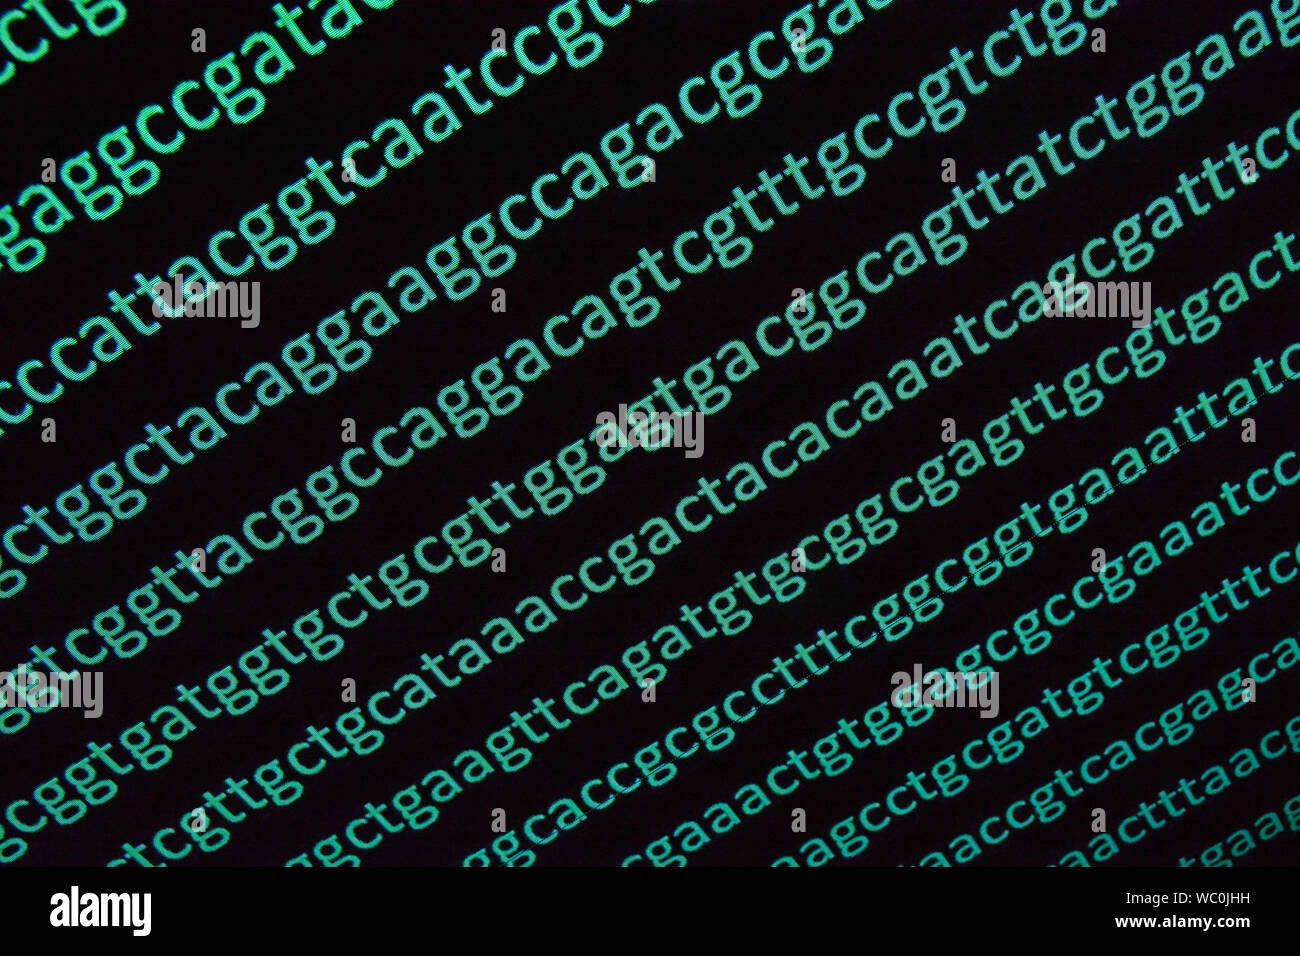 DNA sequencing. Abstract background - genomic sequence. Stock Photo